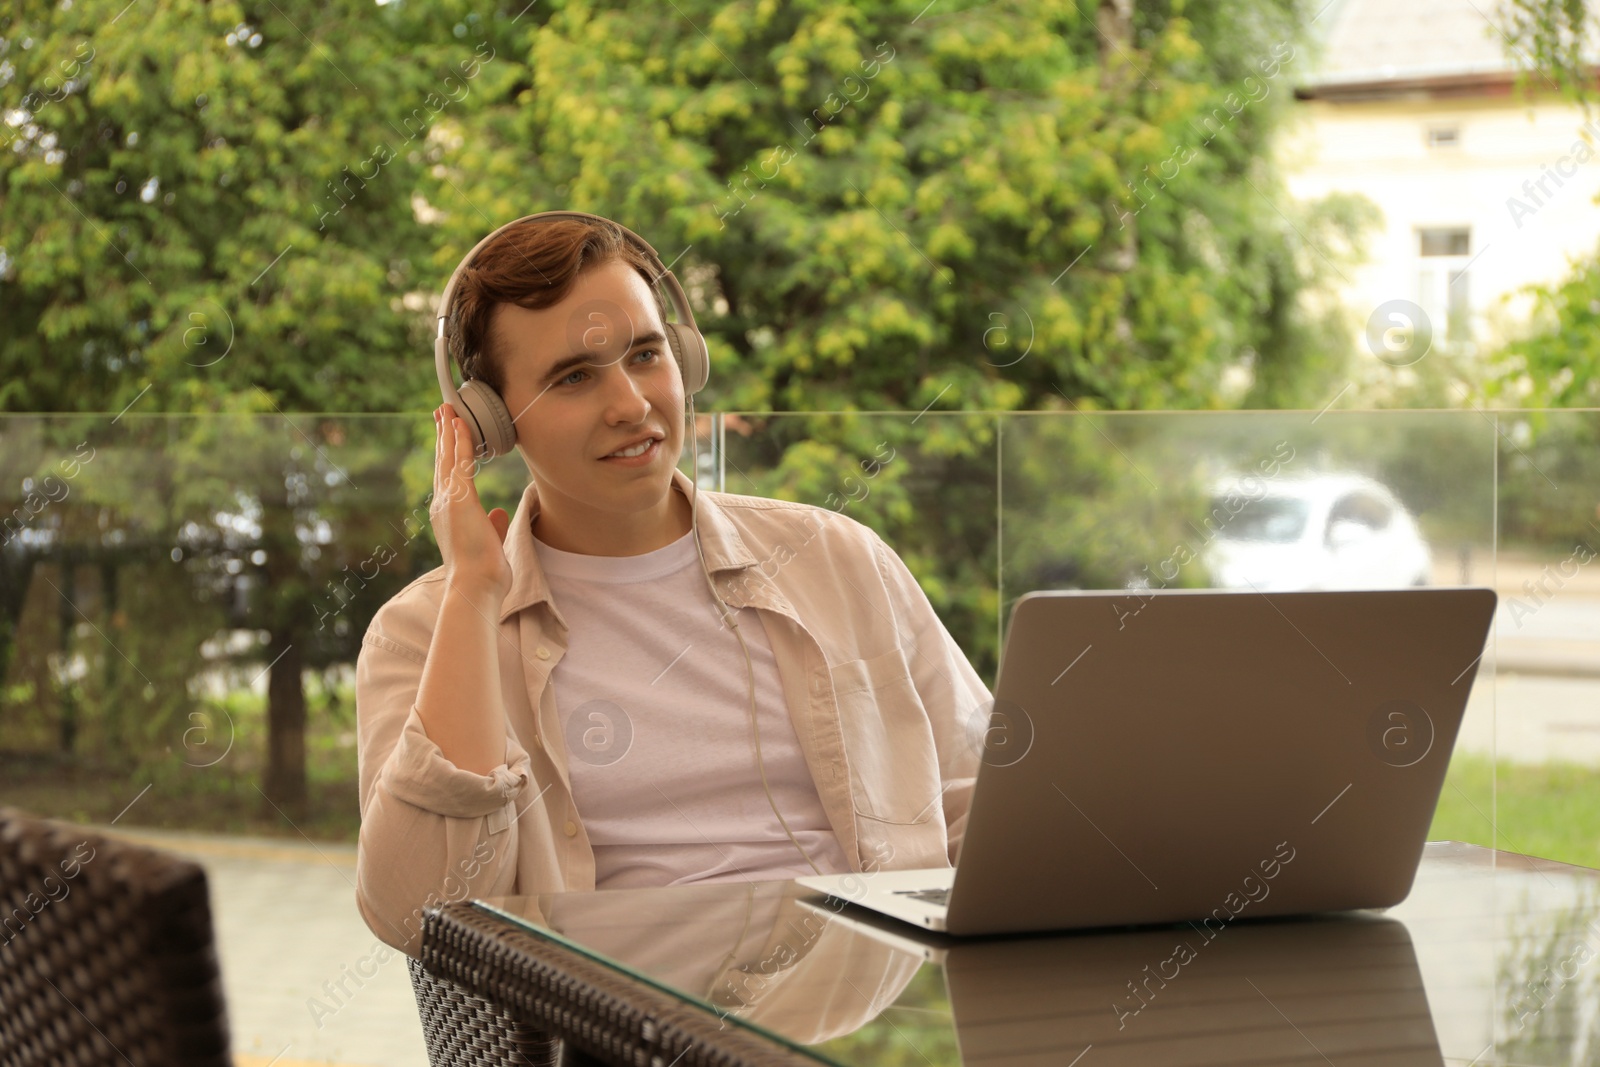 Photo of Handsome young man with headphones working on laptop in outdoor cafe